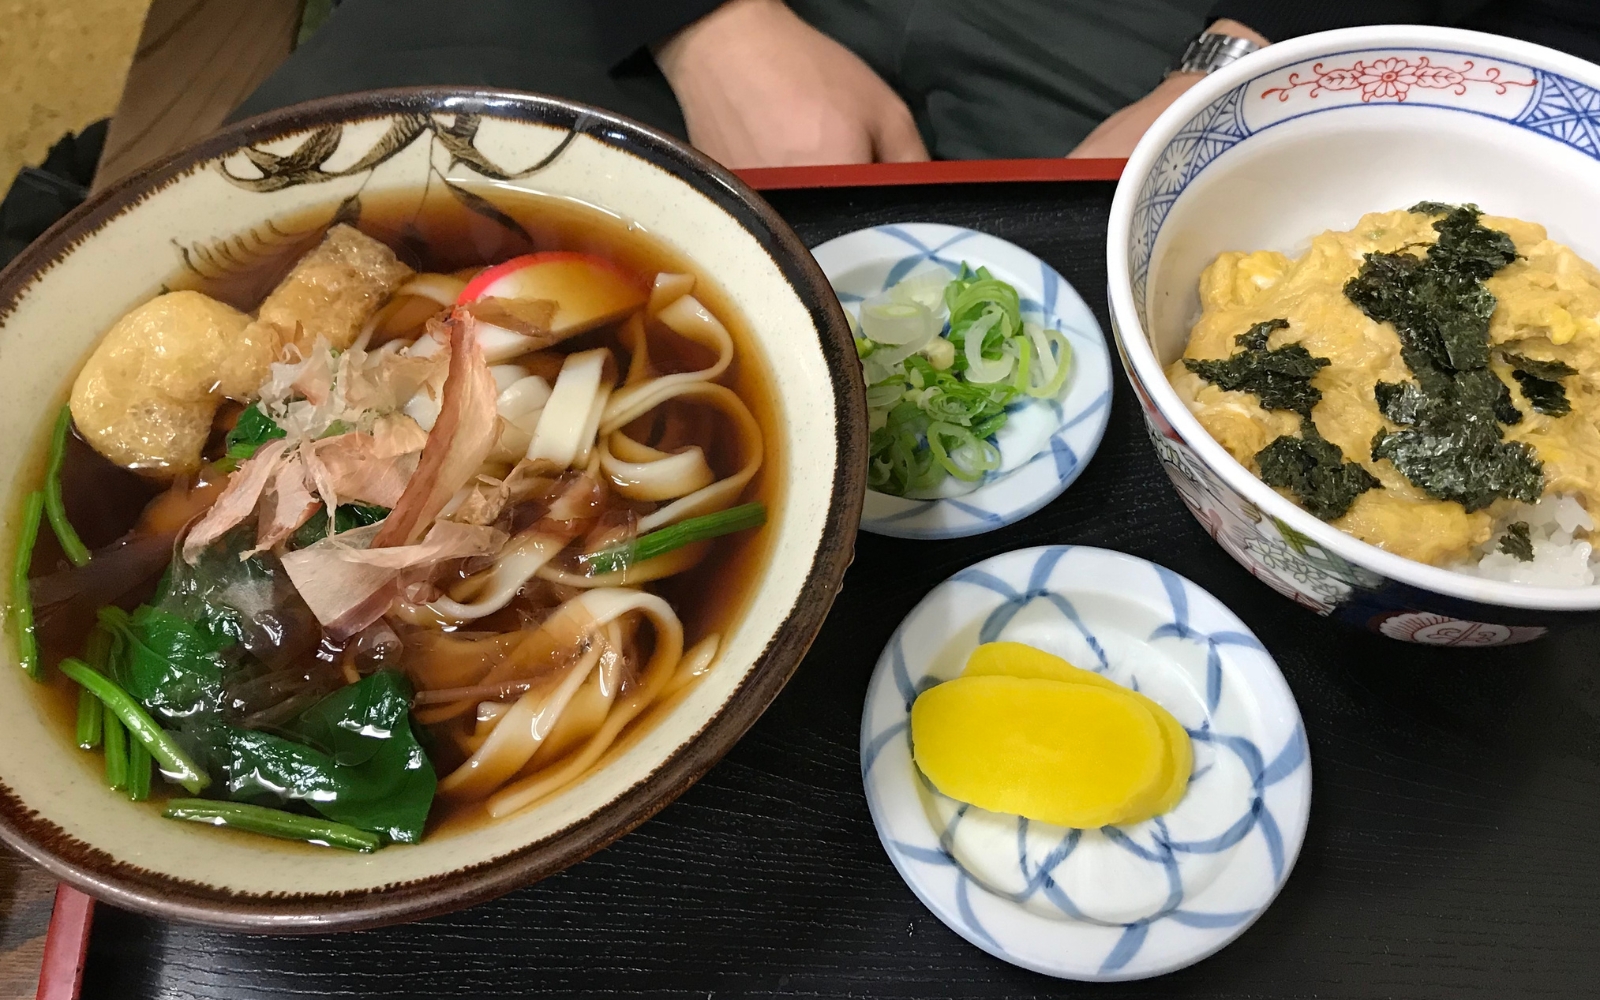 A bowl of kishimen, a flat udon noodle served in a clear broth